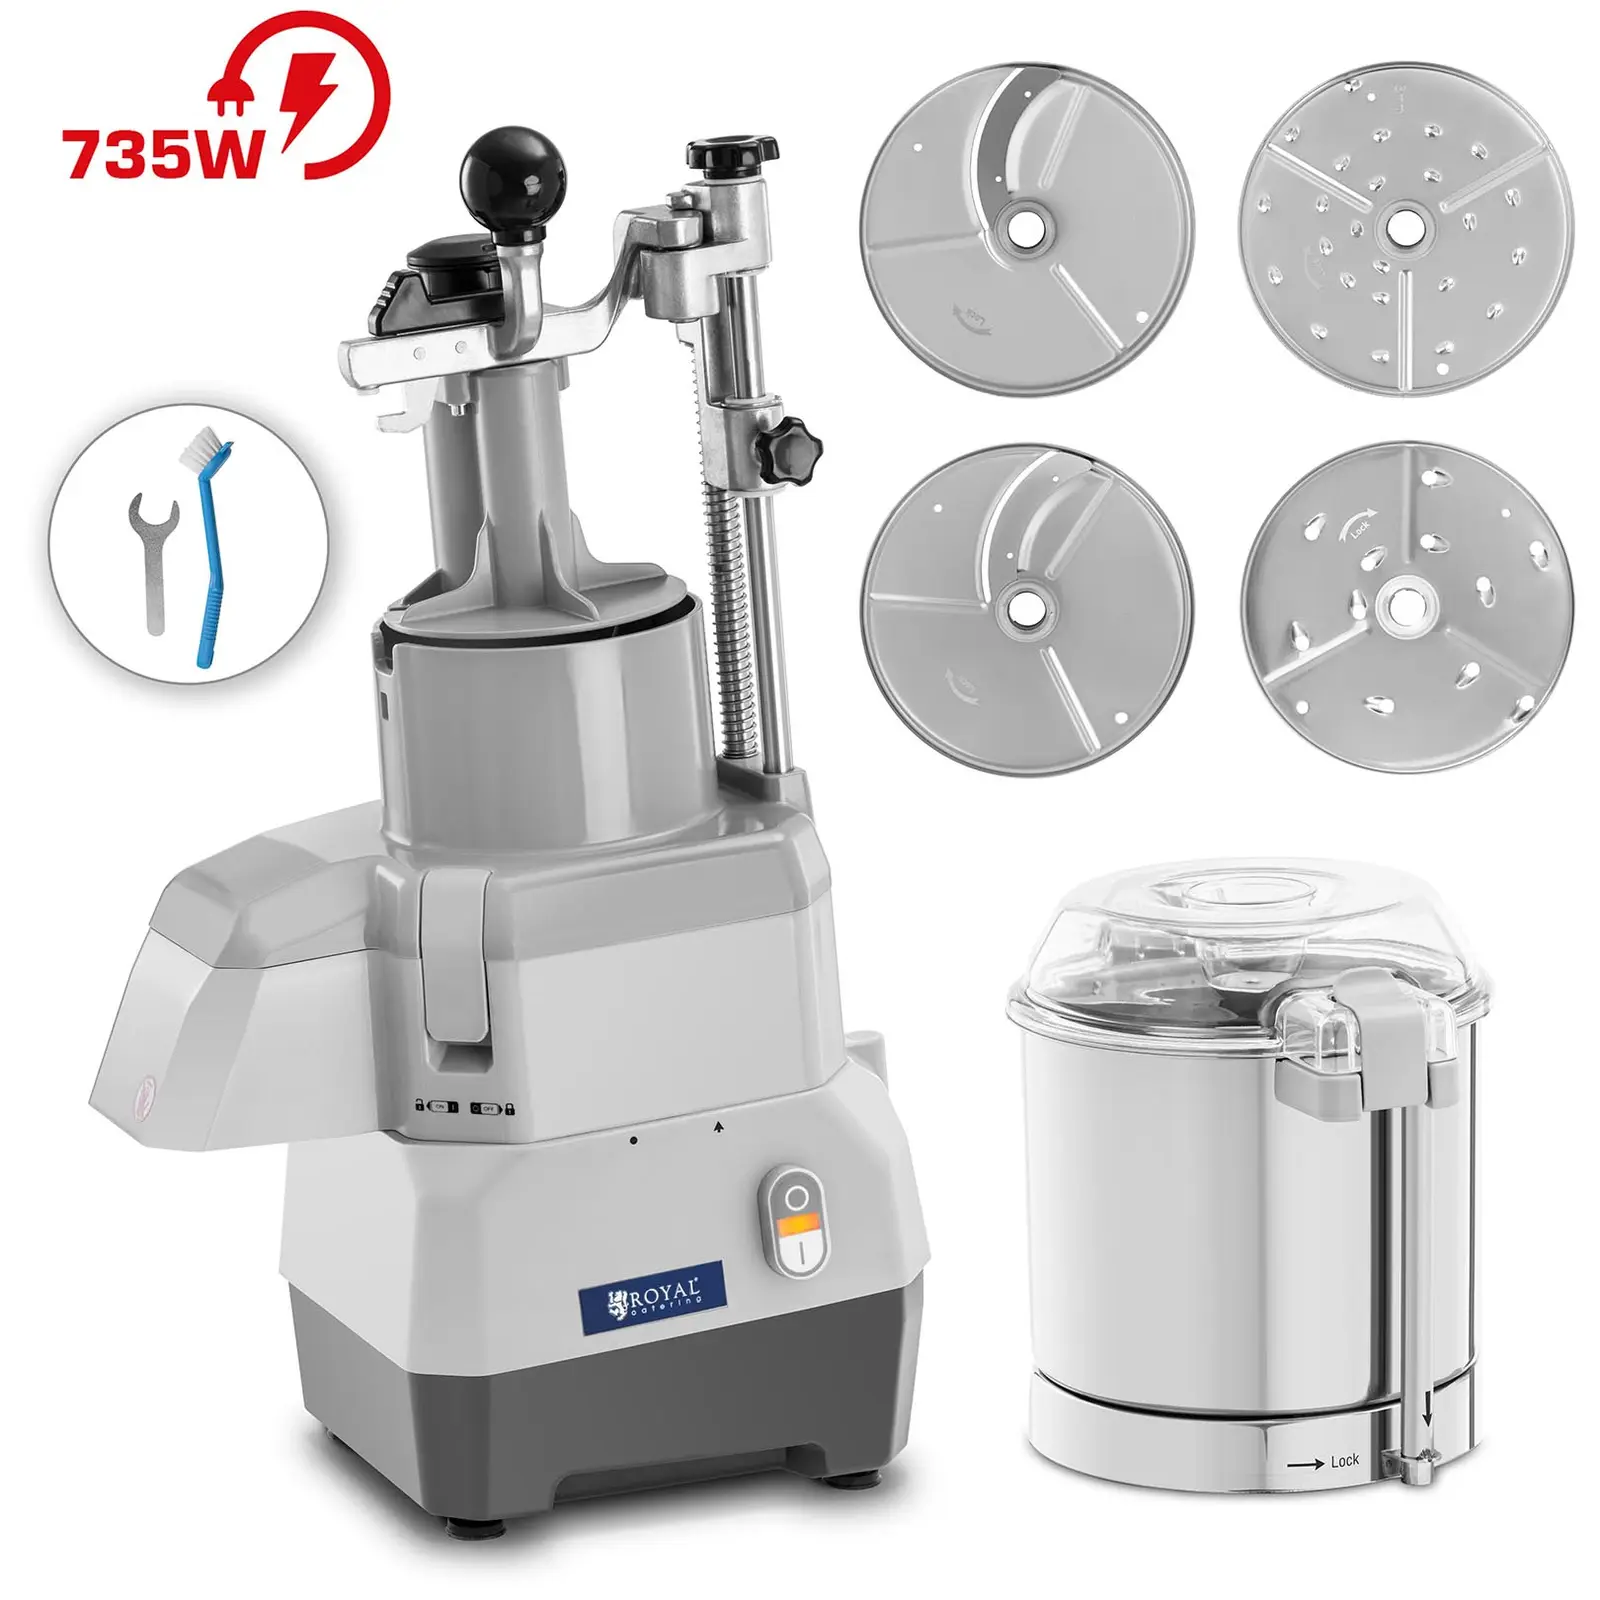 Electric Vegetable Slicer plus Food Processor - 3 l - 735 W - 4 cutting discs - Ø 174 mm - Royal Catering